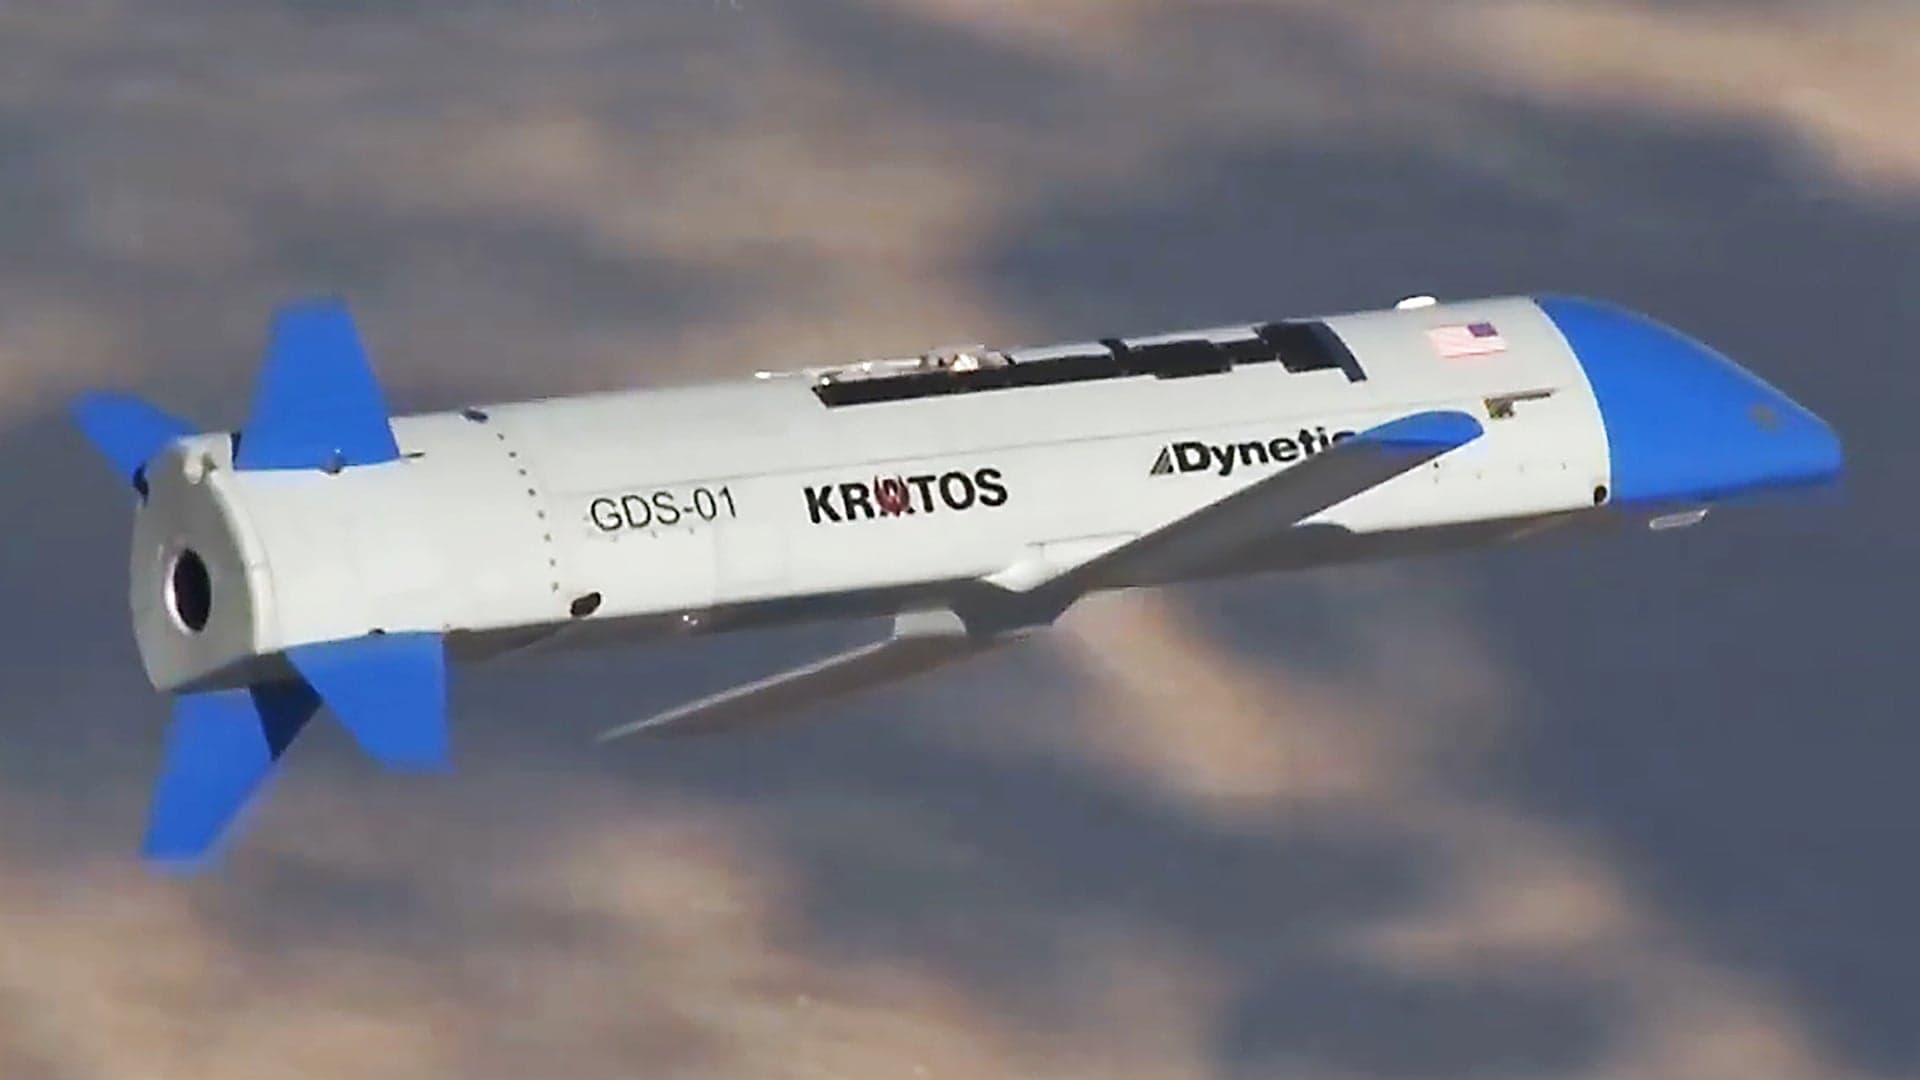 Watch DARPA’s Air-Launched And Air-Recovered “Gremlins” Drone Take Its First Flight